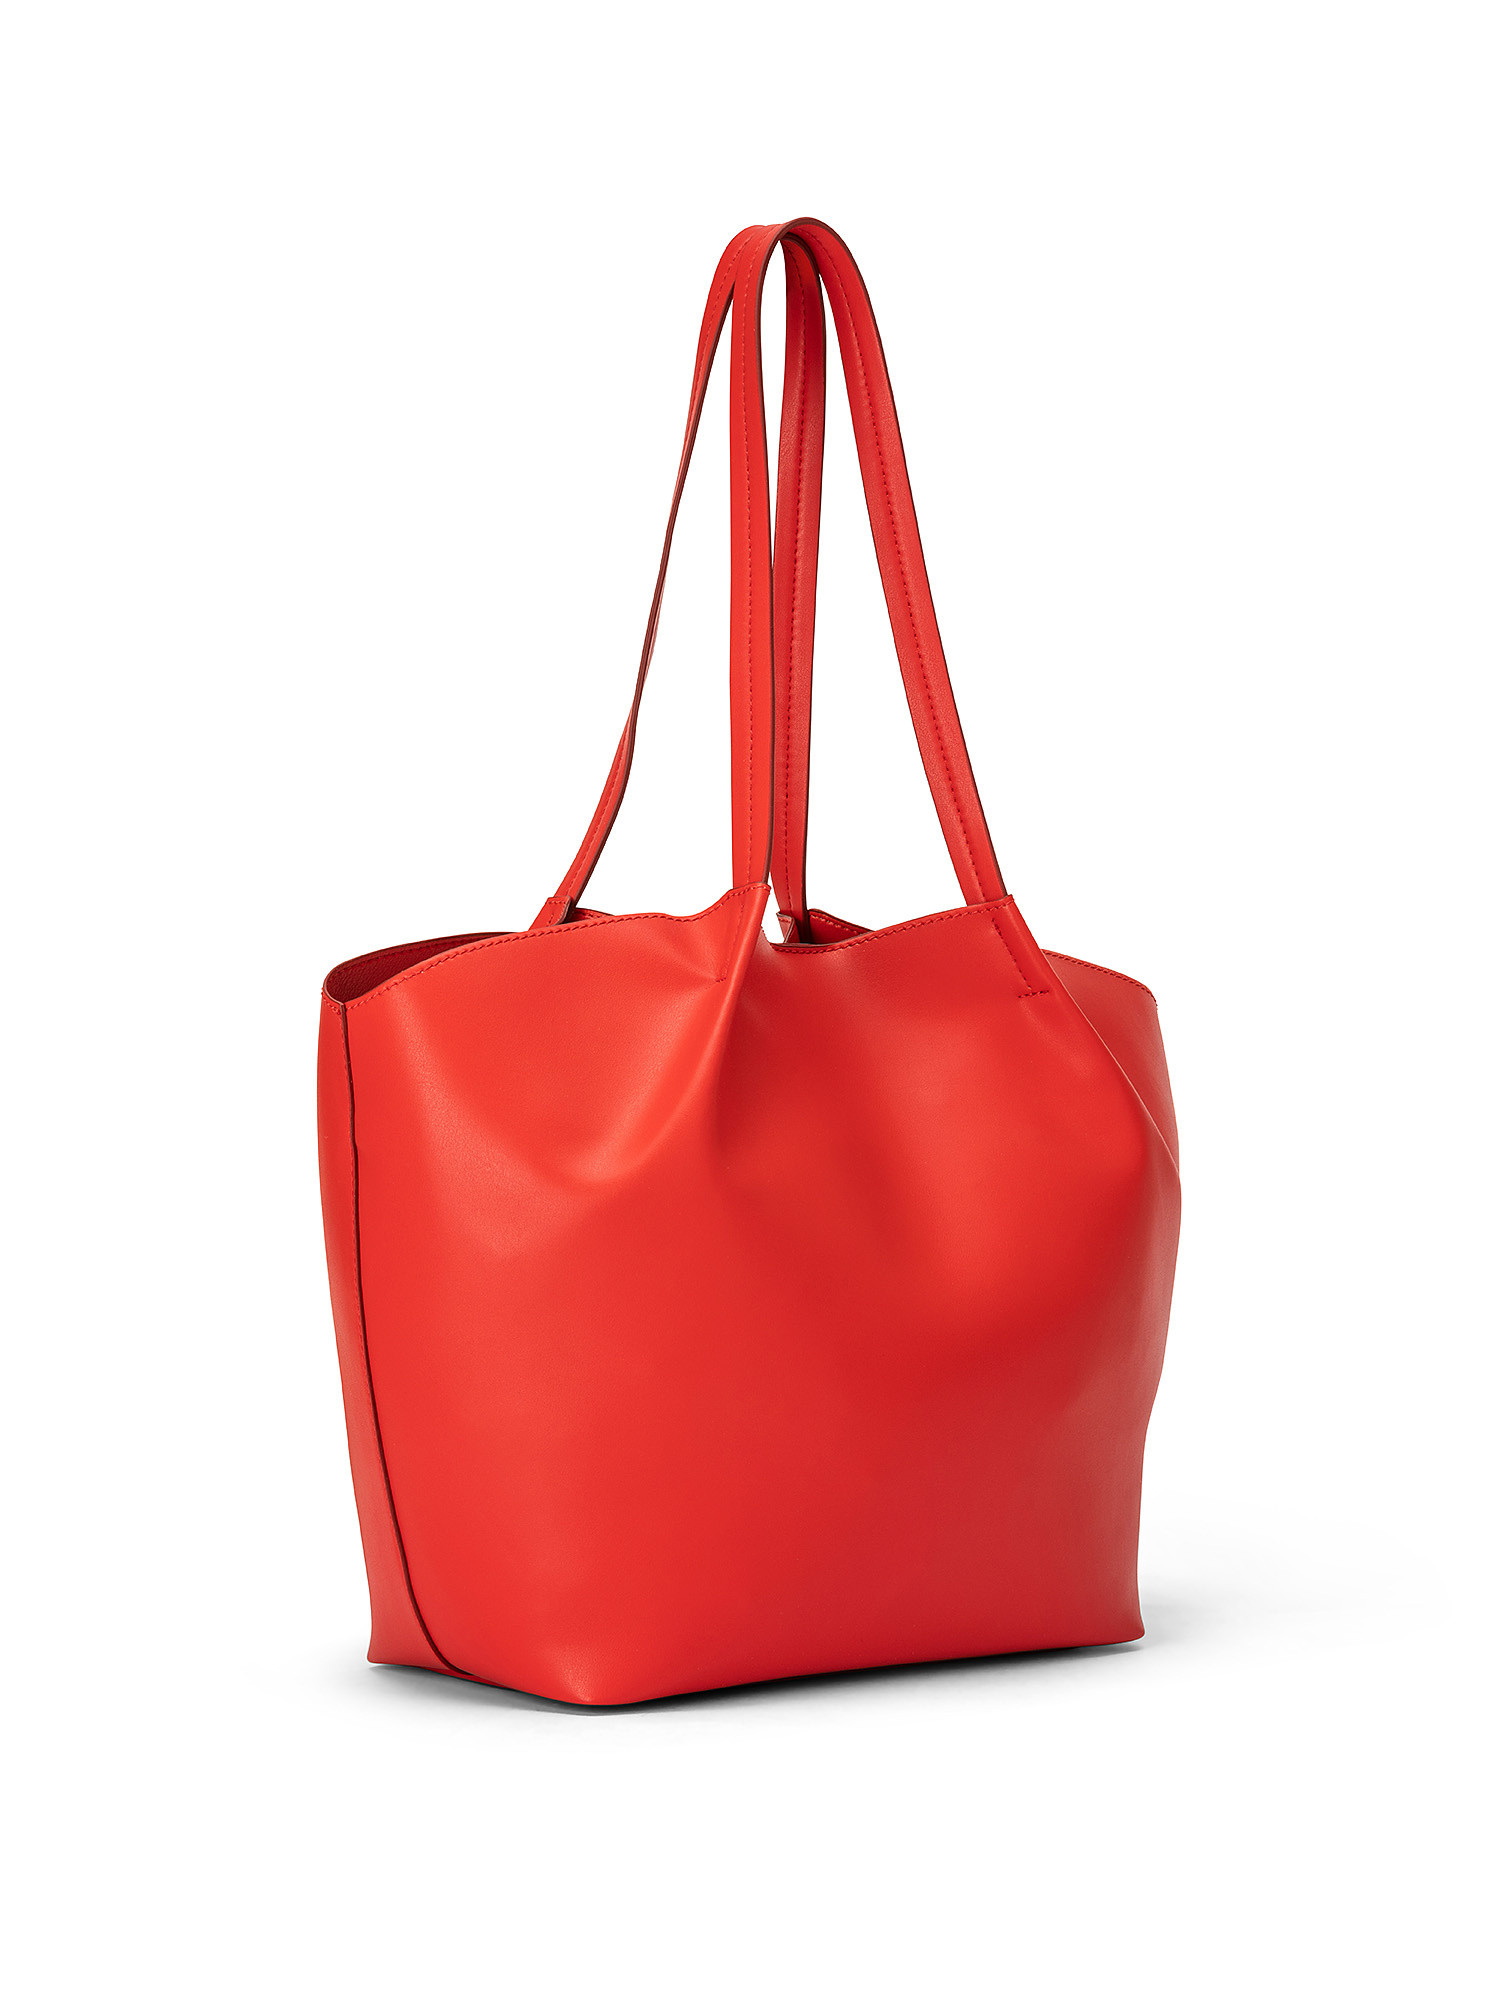 Tote bag, Rosso, large image number 1